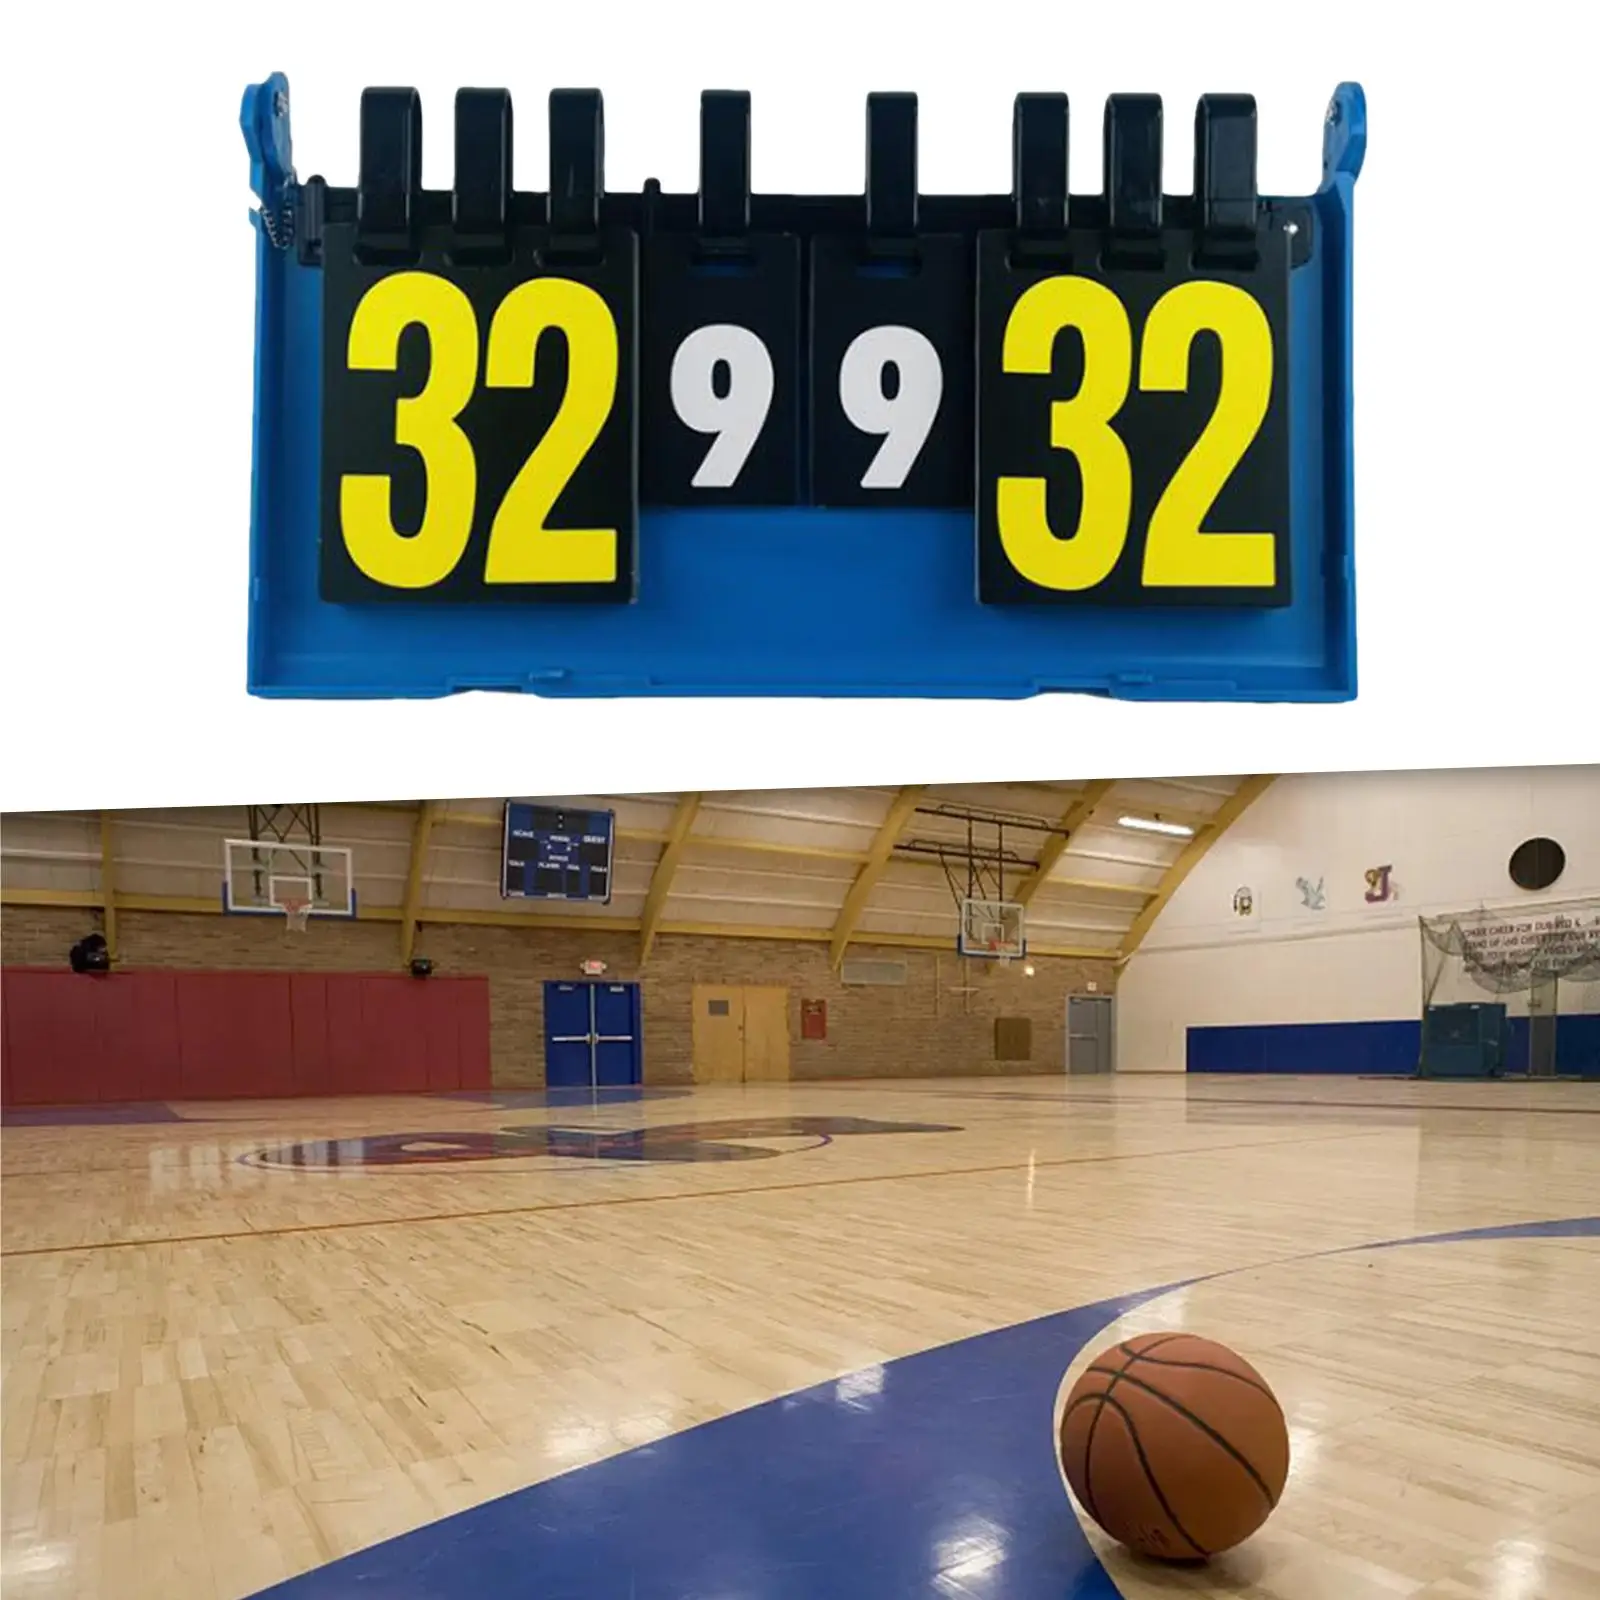 Score Board 39cmx21cm Large Size Tabletop or Hanging Score Keeper for Pingpong Soccer Indoor Outdoor Hockey Competitive Sports